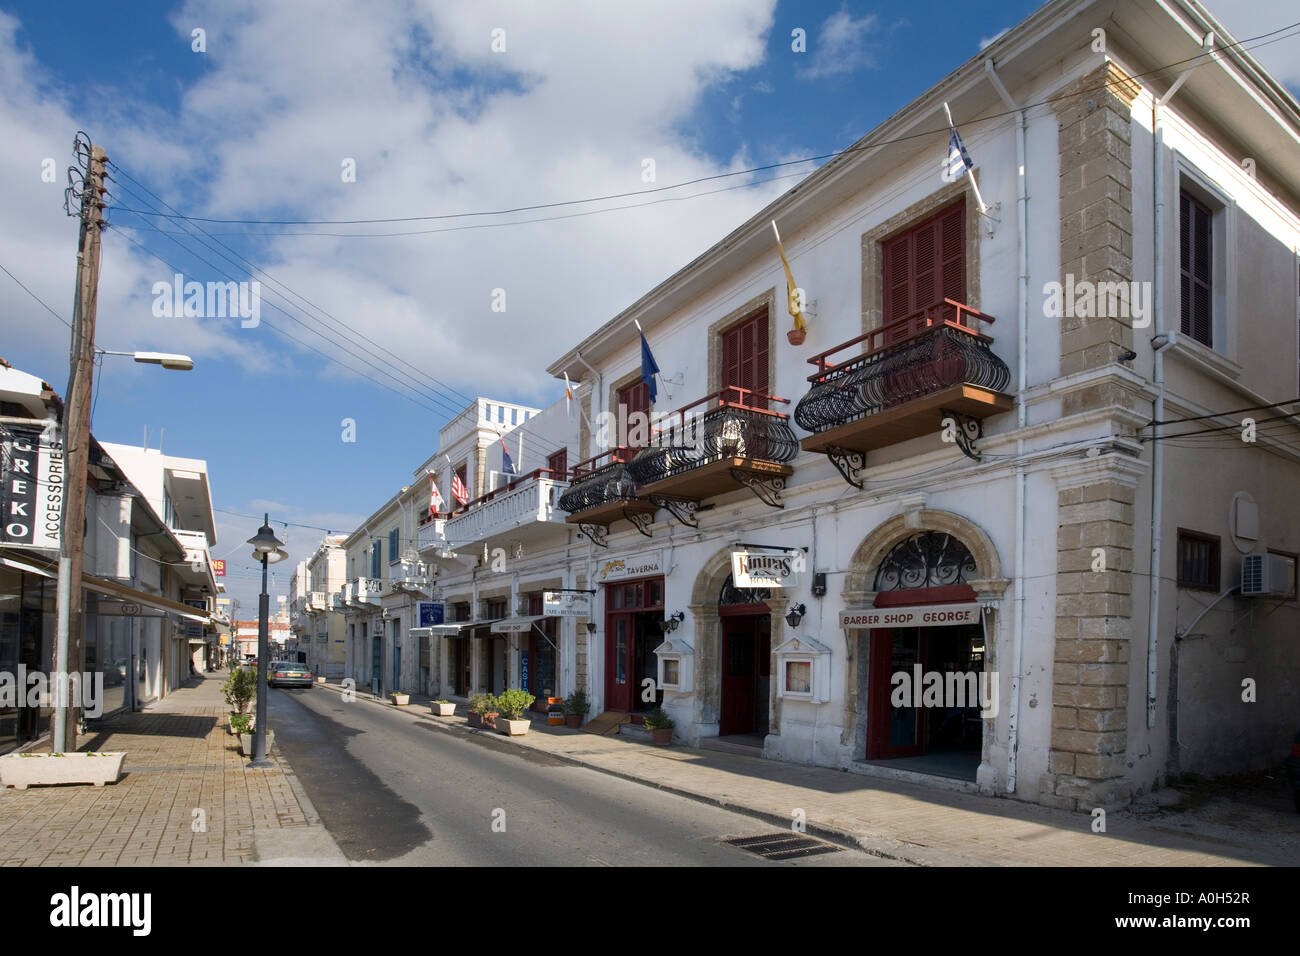 A STREET SCENE SHOWING THE KINIRAS HOTEL IN THE UPPER OLDER TOWN OF PAPHOS, CYPRUS Stock Photo